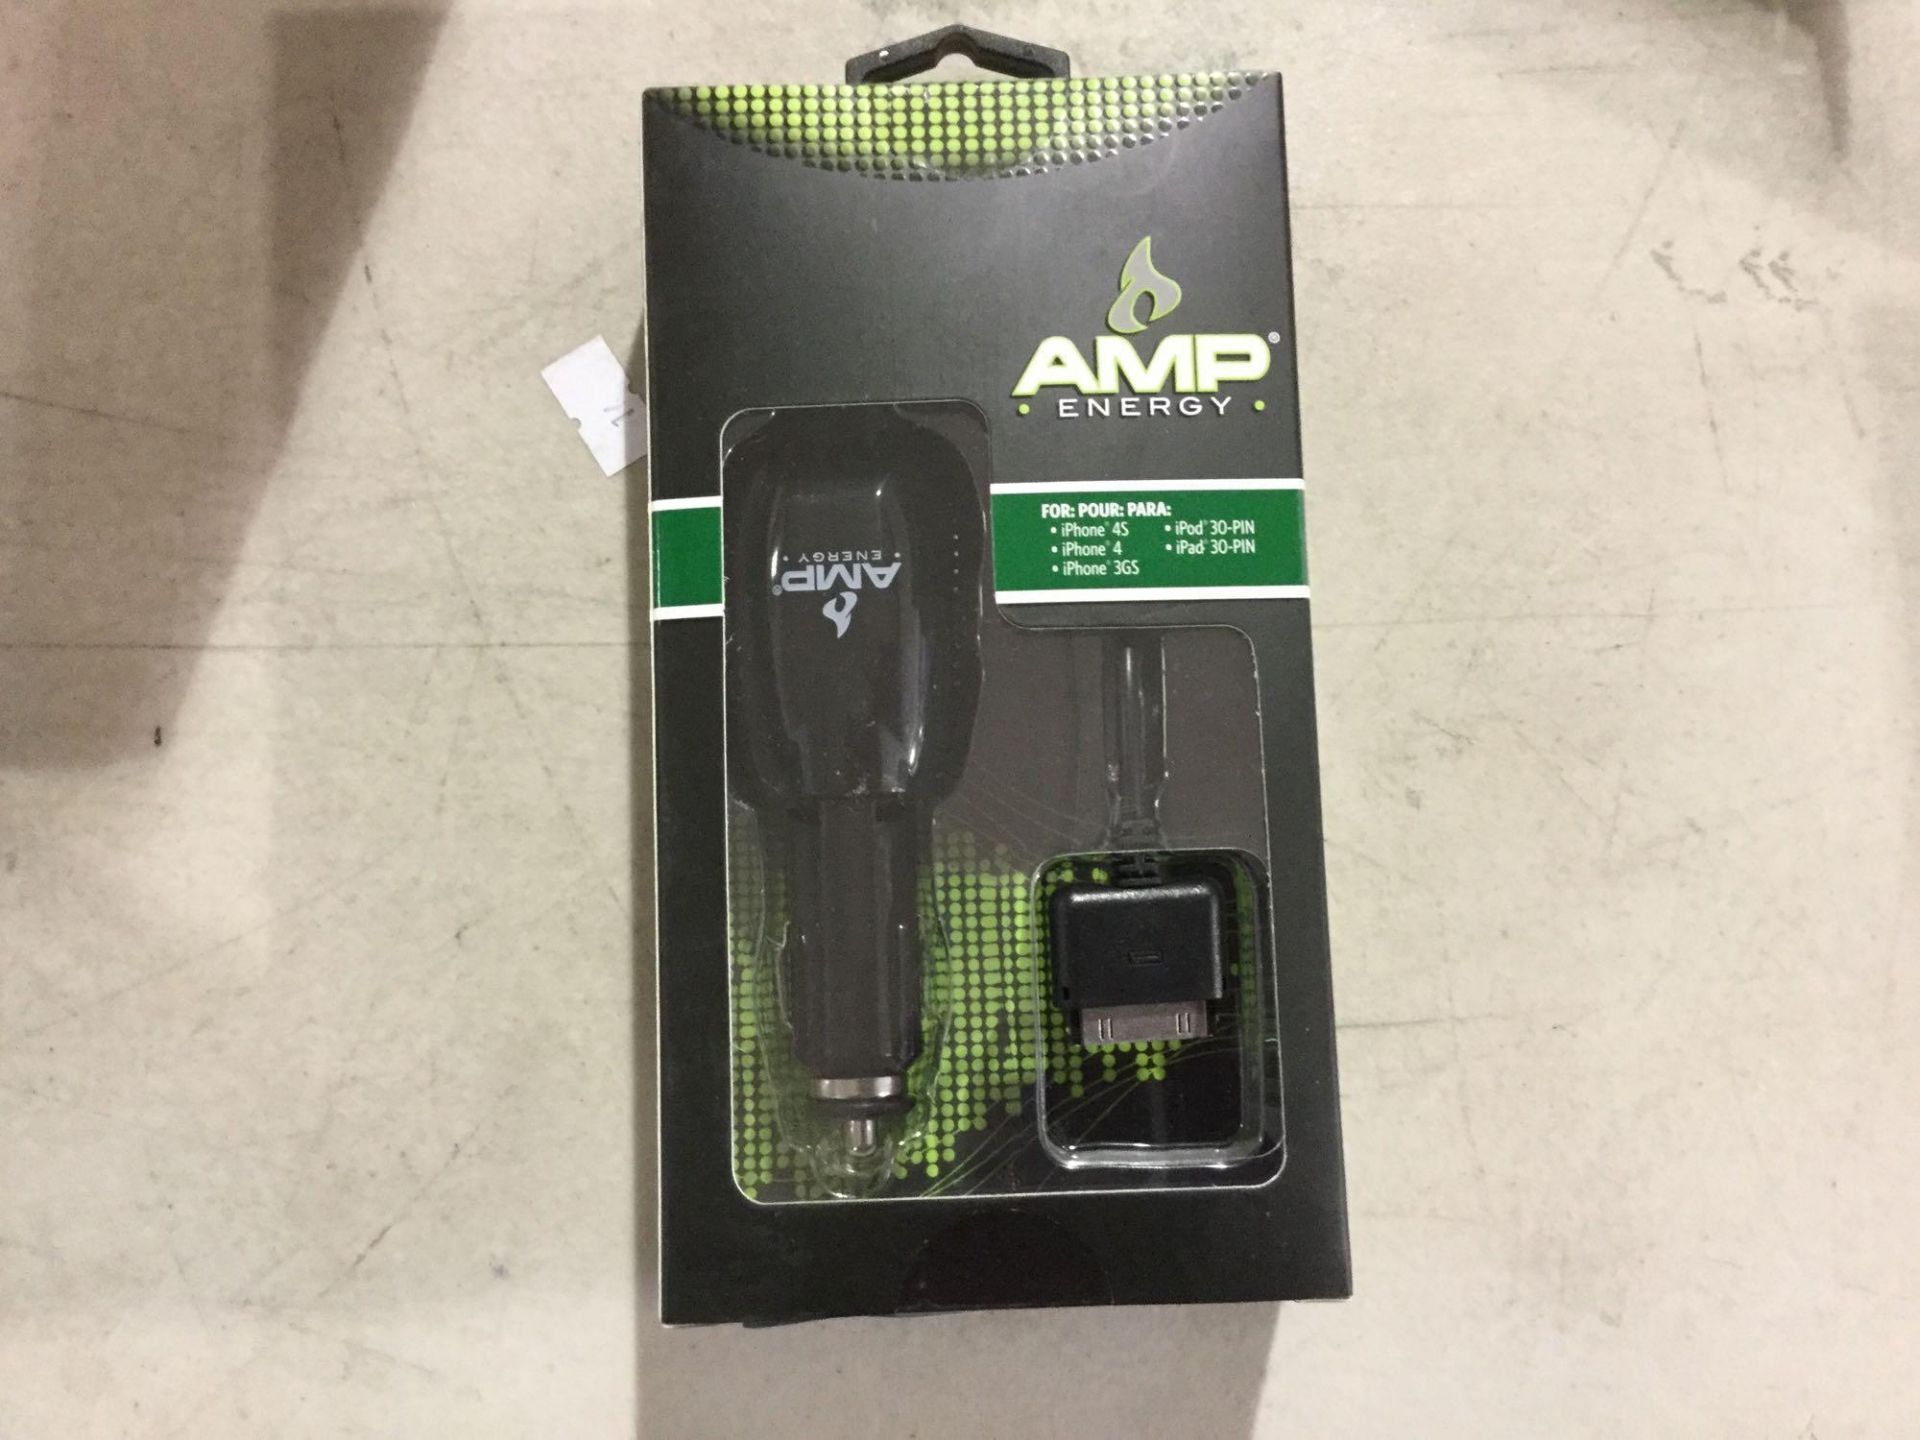 AMP Energy Car Charger - for iPhone 4S, 4, 3GS and iPod 30-PIN - Black